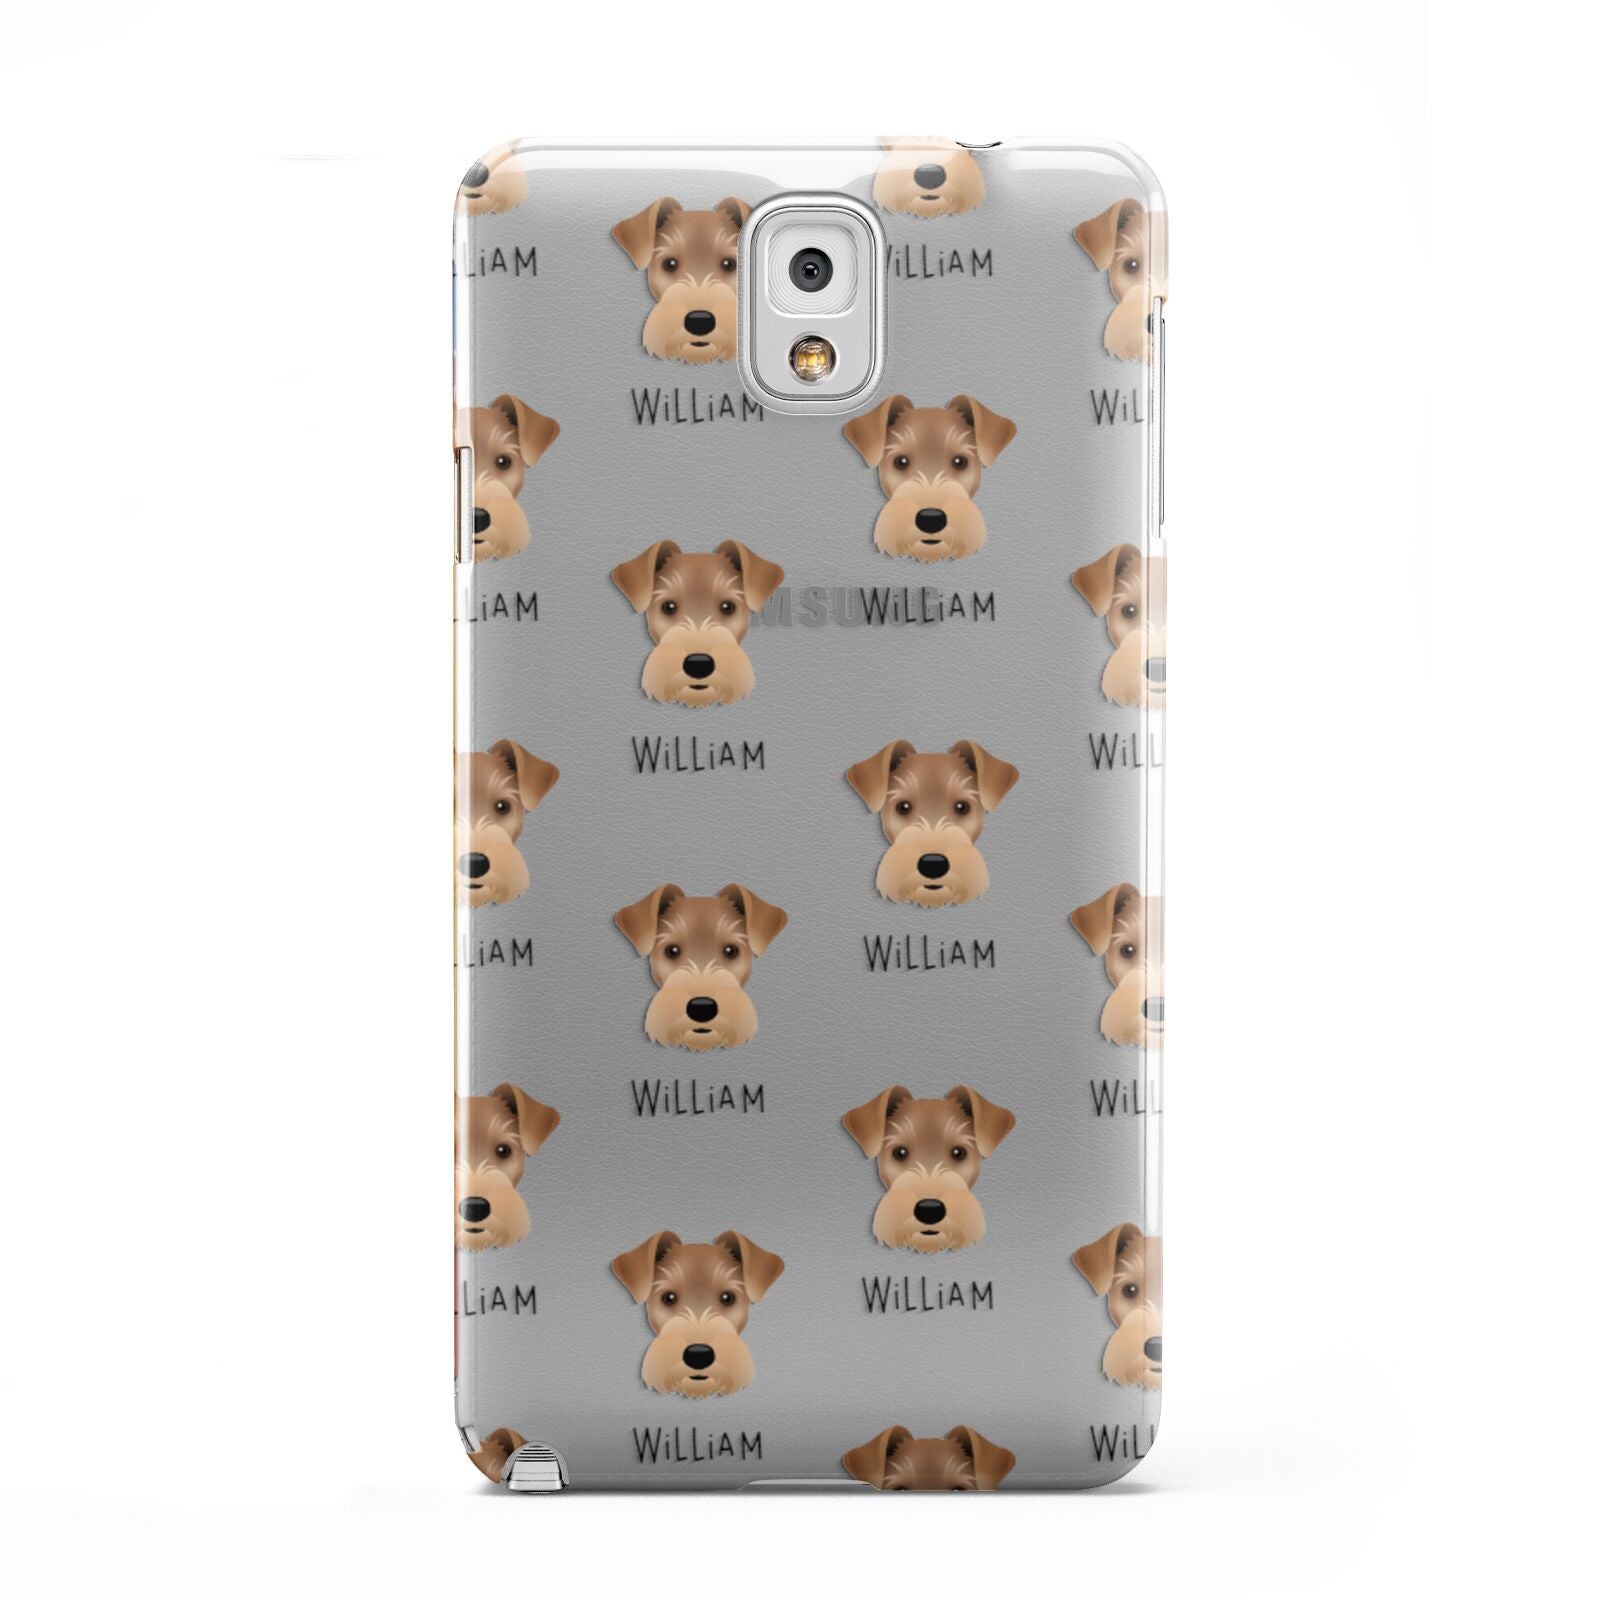 Welsh Terrier Icon with Name Samsung Galaxy Note 3 Case